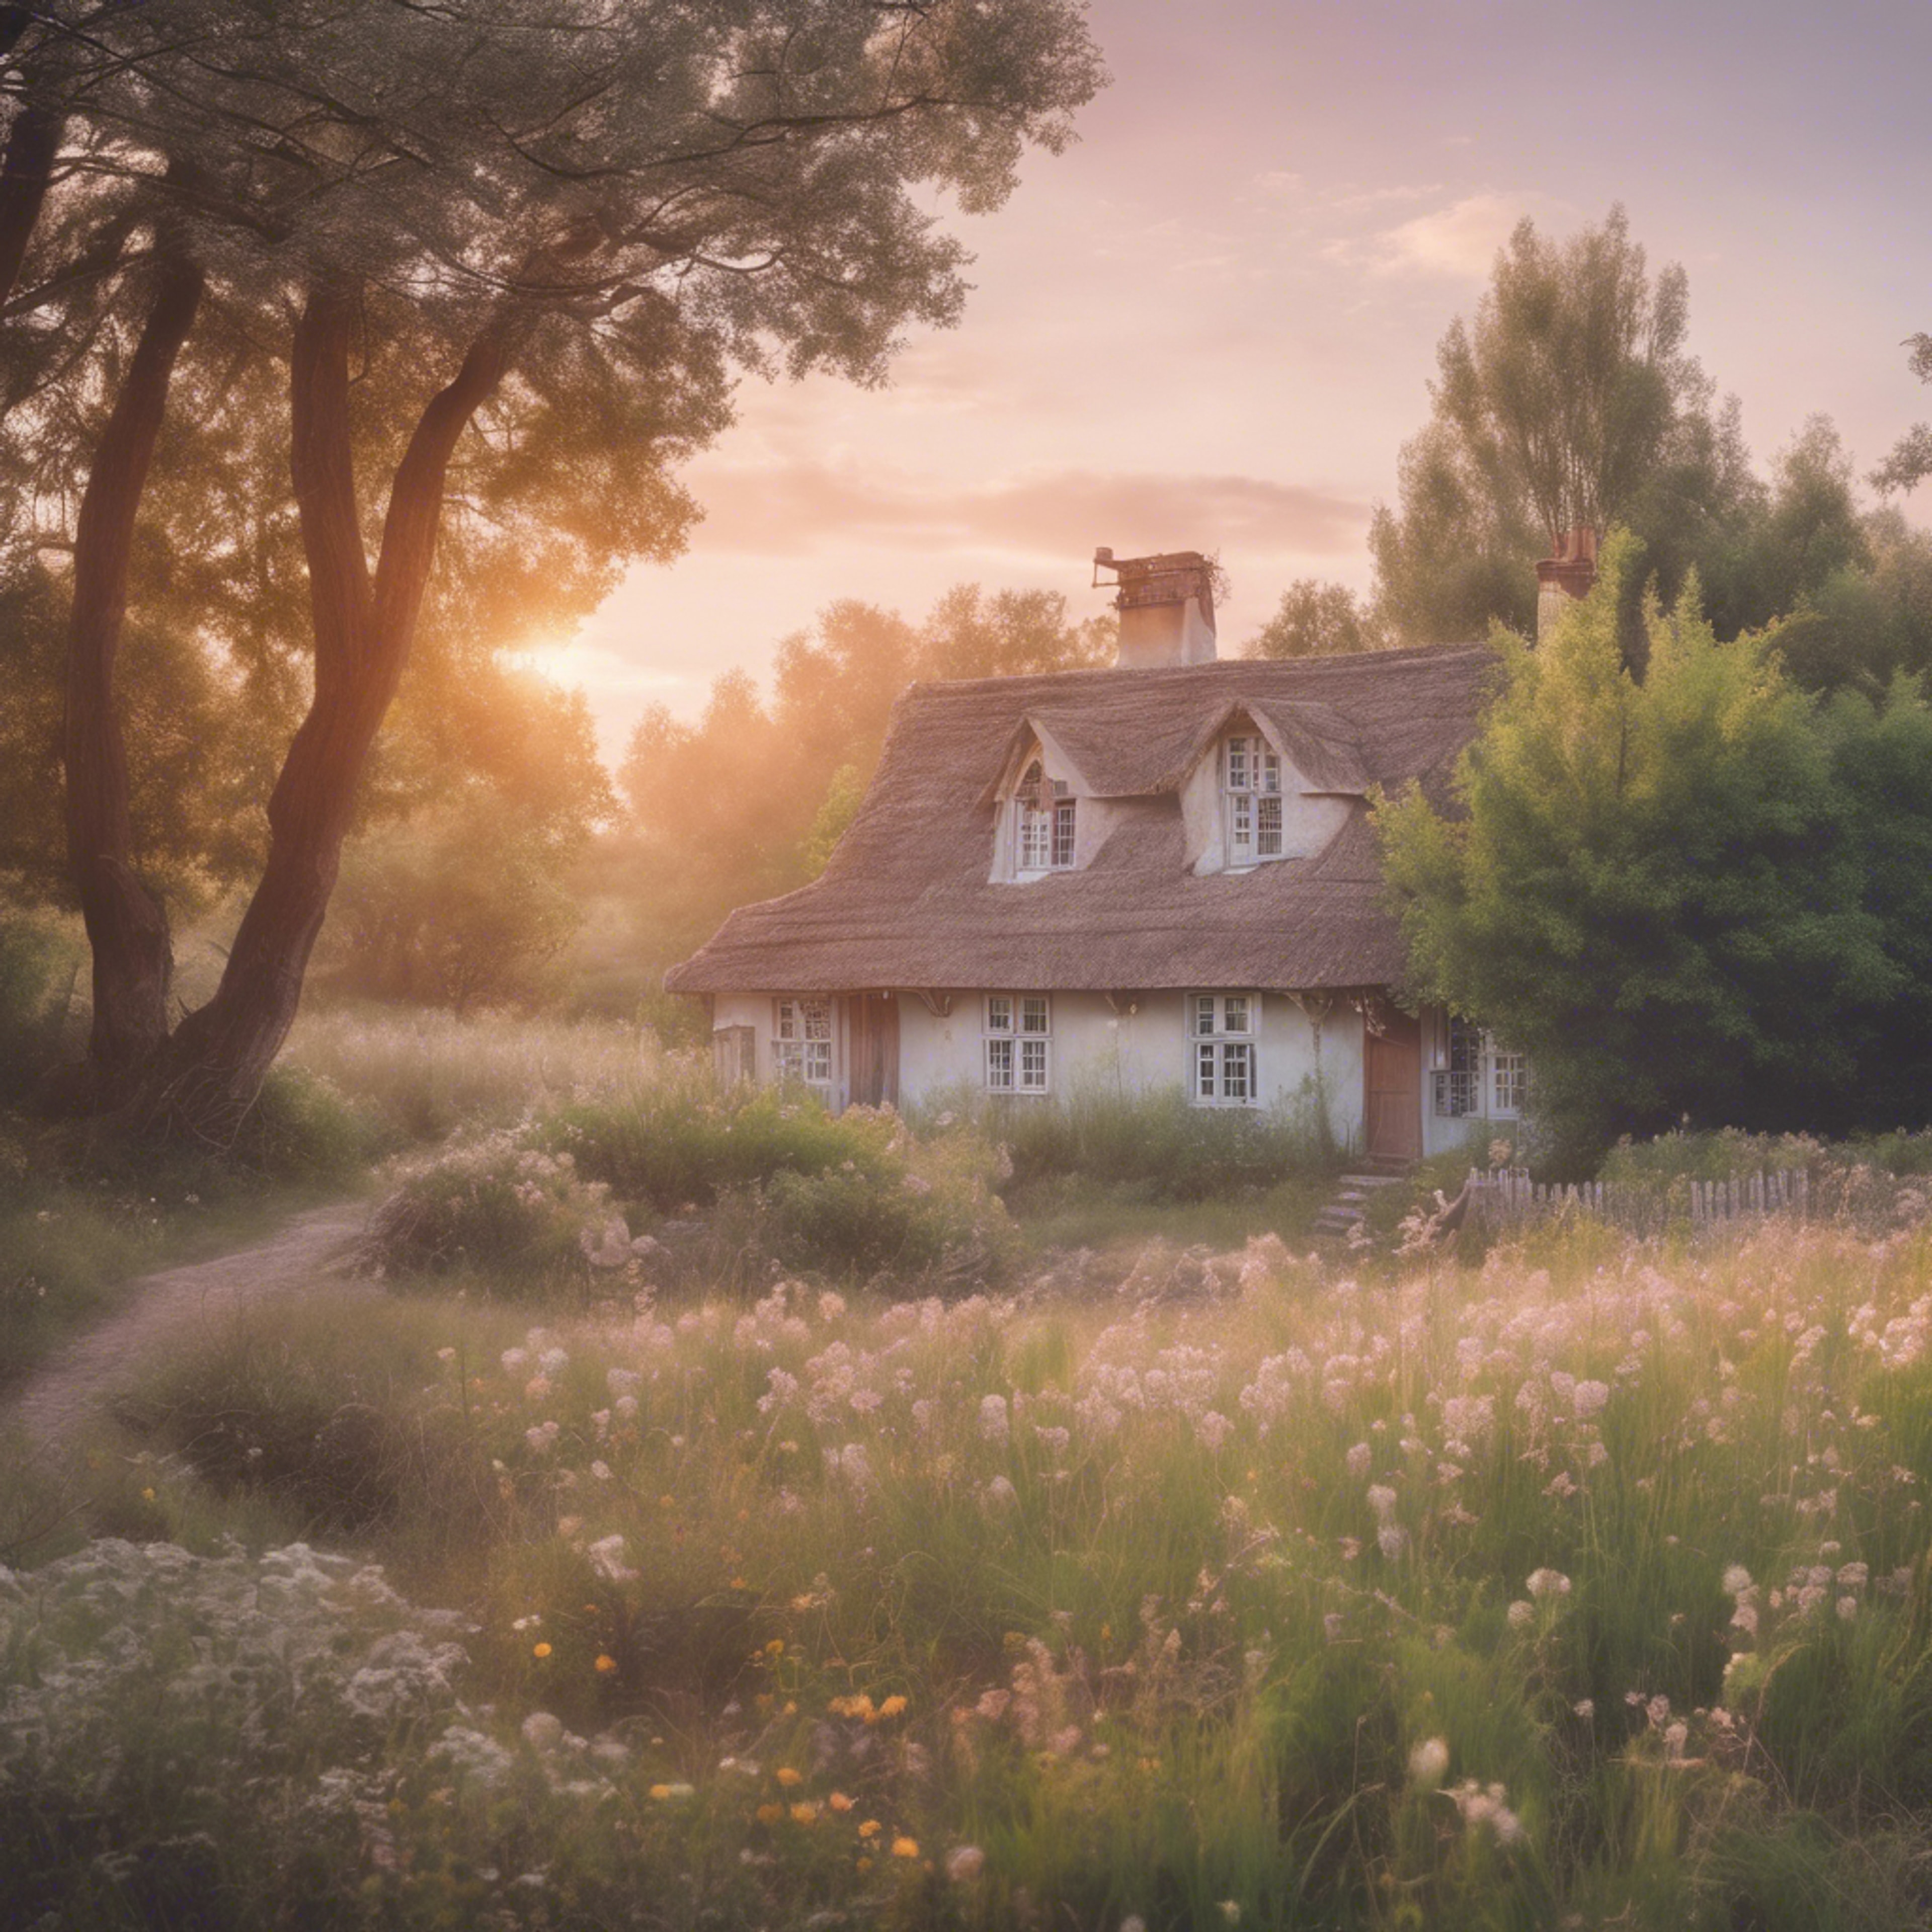 A soft pastel sunrise over rustic cottages, birthing ethereal aesthetic beauty Tapeta[daea3b7a39e14a169eb1]